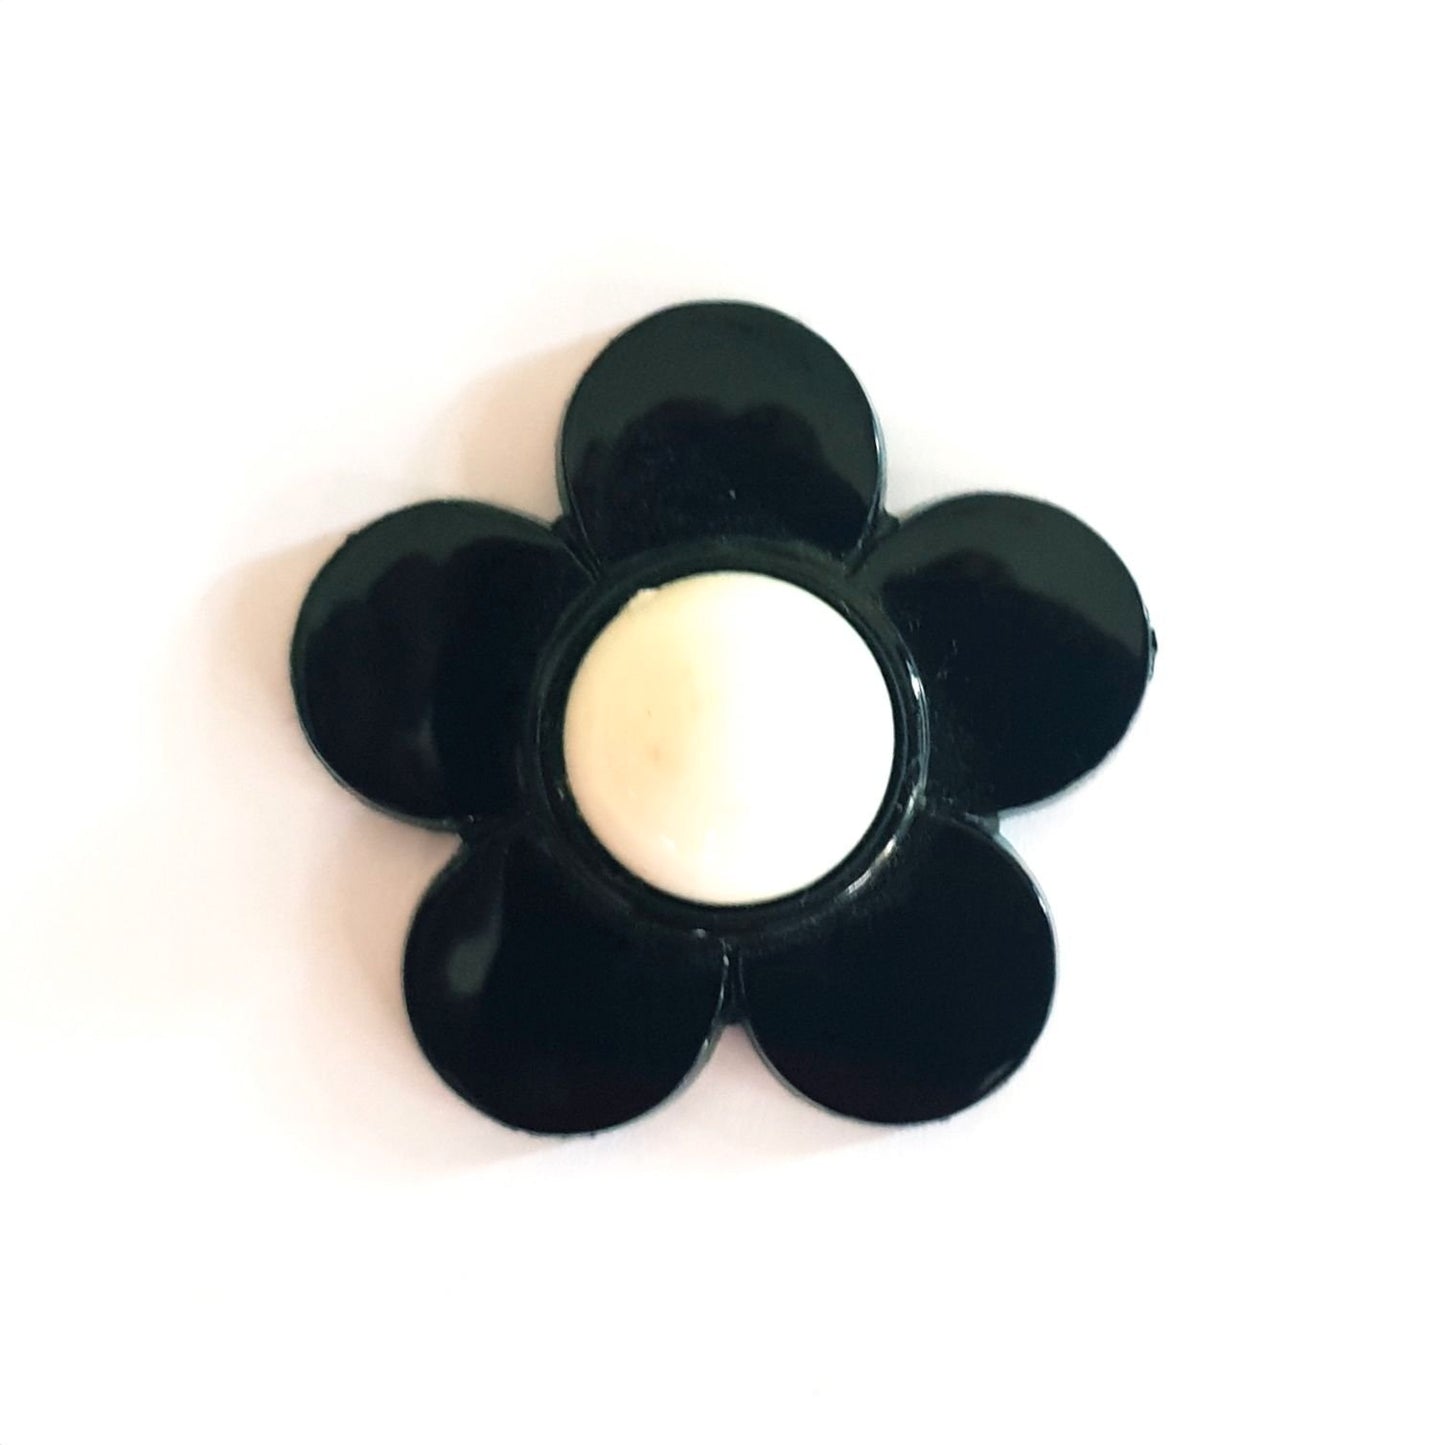 Flatback Daisy Lucite Black and White 40mm